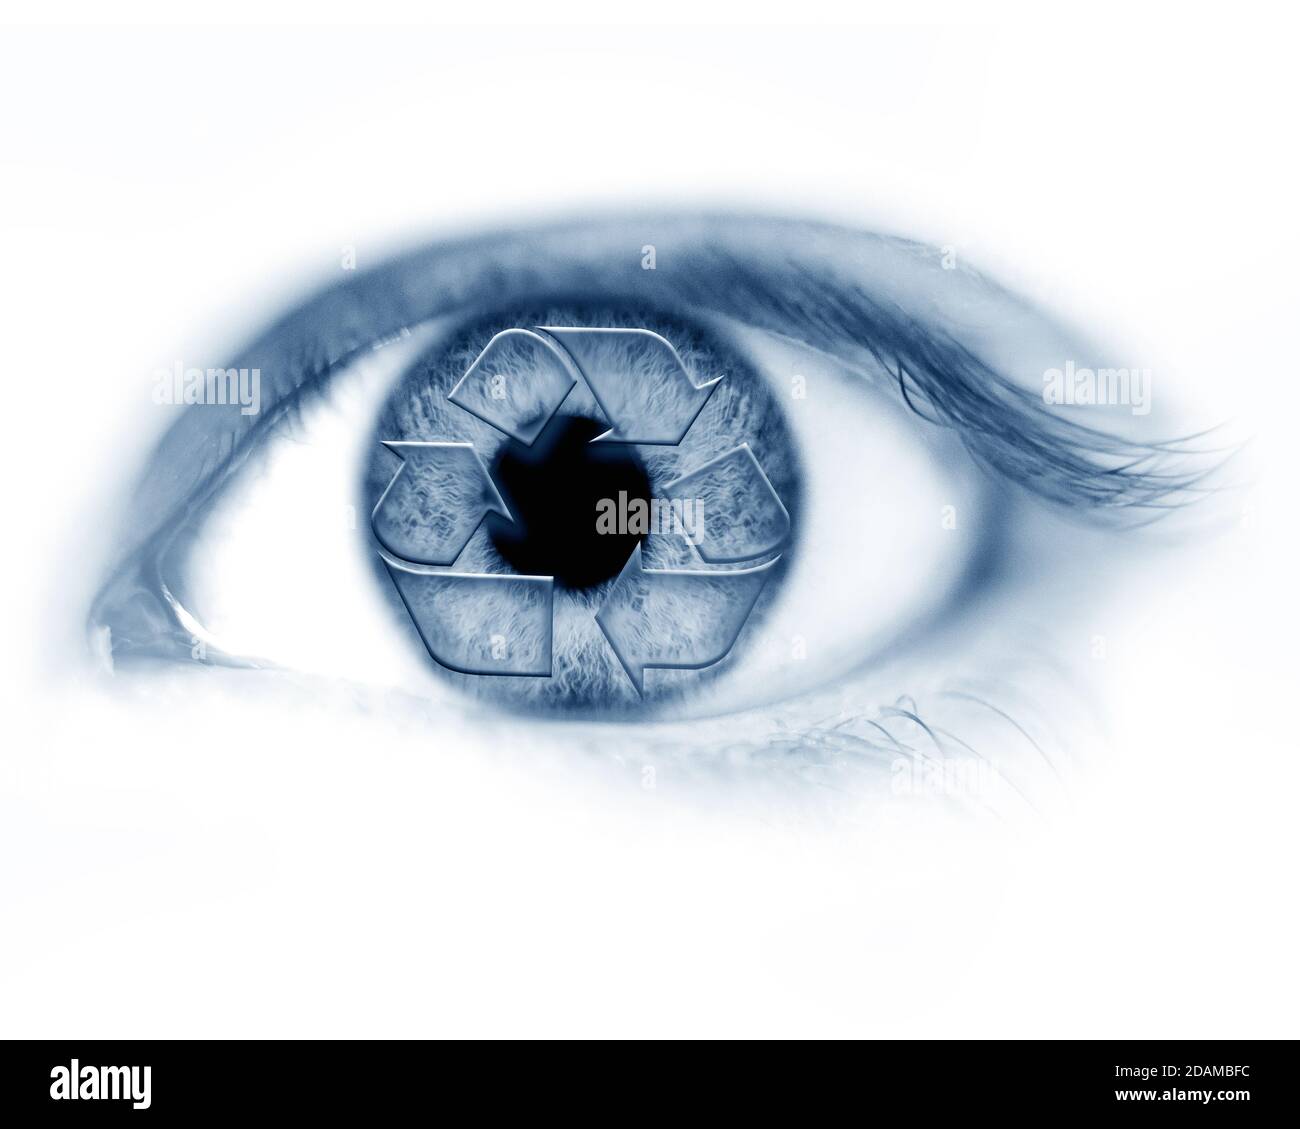 Human eye with recycling symbol, illustration. Stock Photo